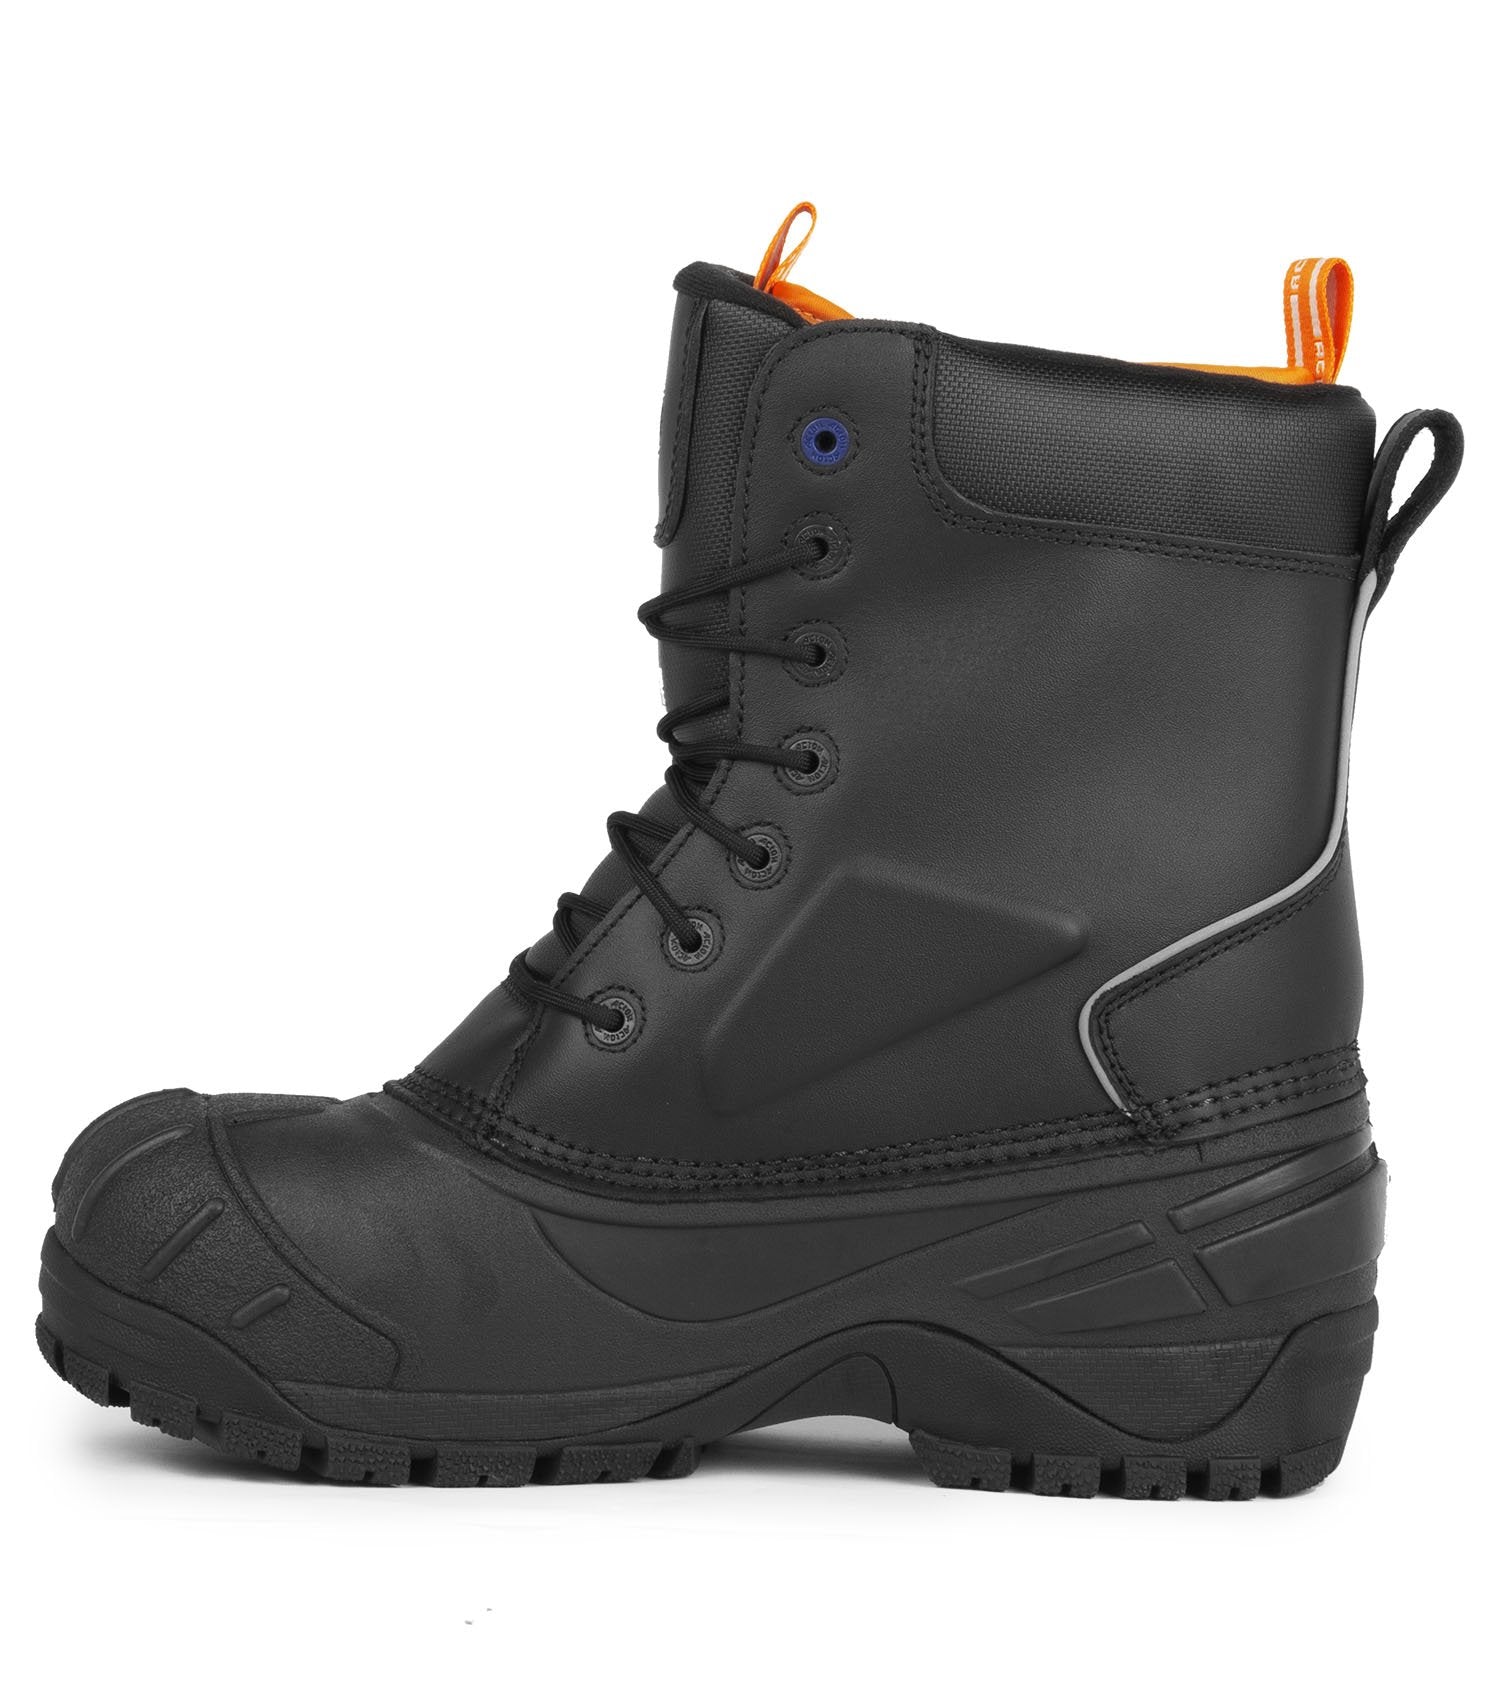 Acton Winterforce Men's 11" Composite Toe Winter Safety Work Boots | -75°C/-103°F Rated | Sizes 4 - 14 Work Boots - Cleanflow